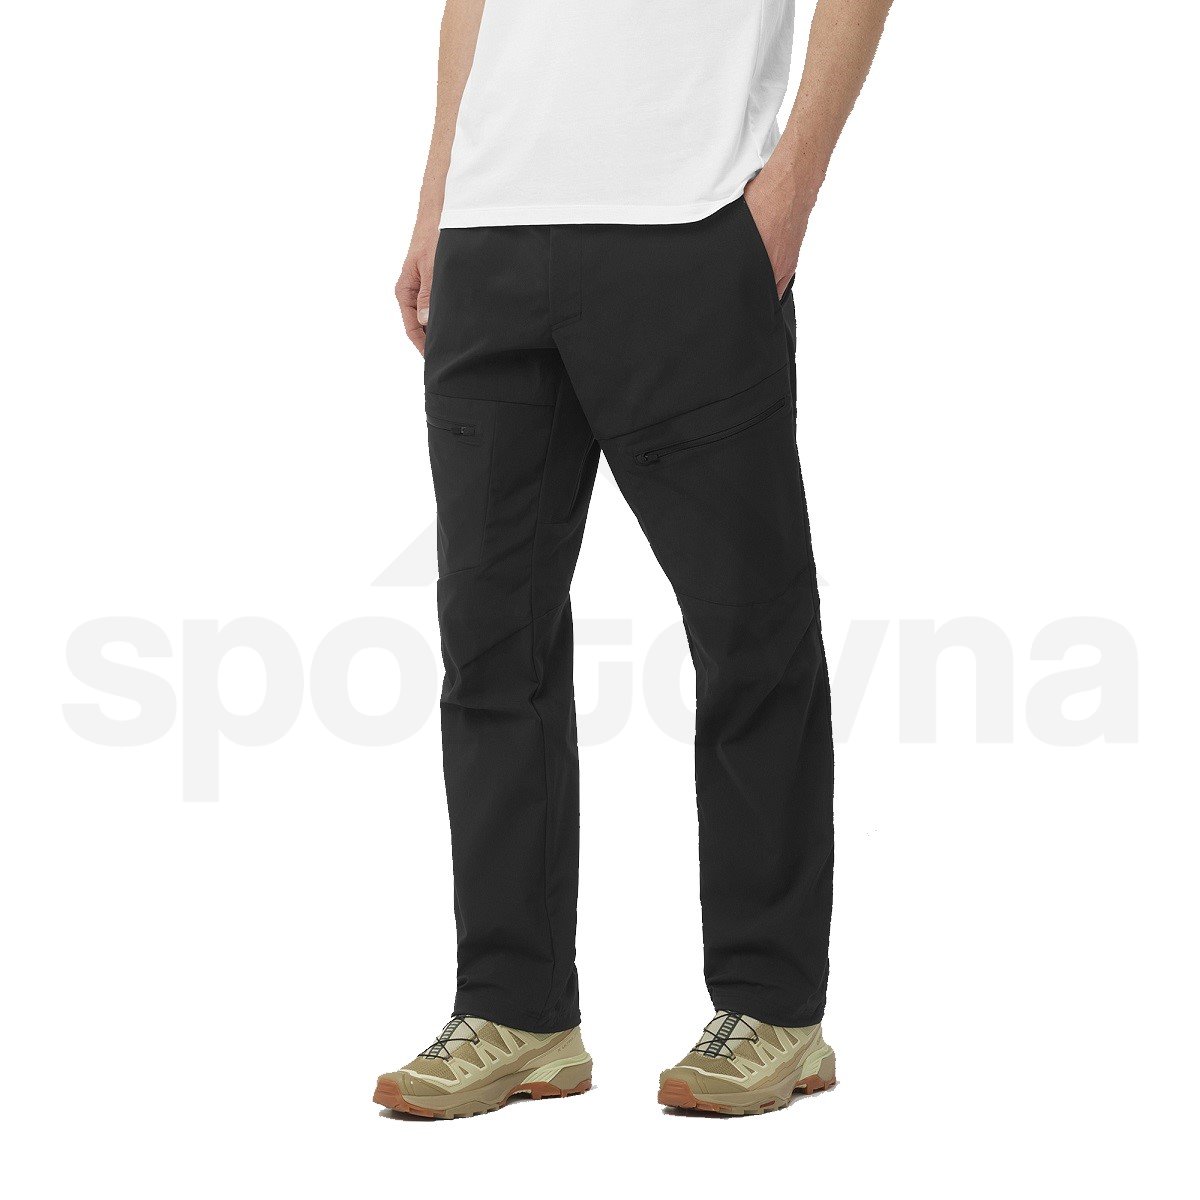 LC2212200_0_MOD_outerpathutilitypants_deepblack_outdoor_m.png.high-res